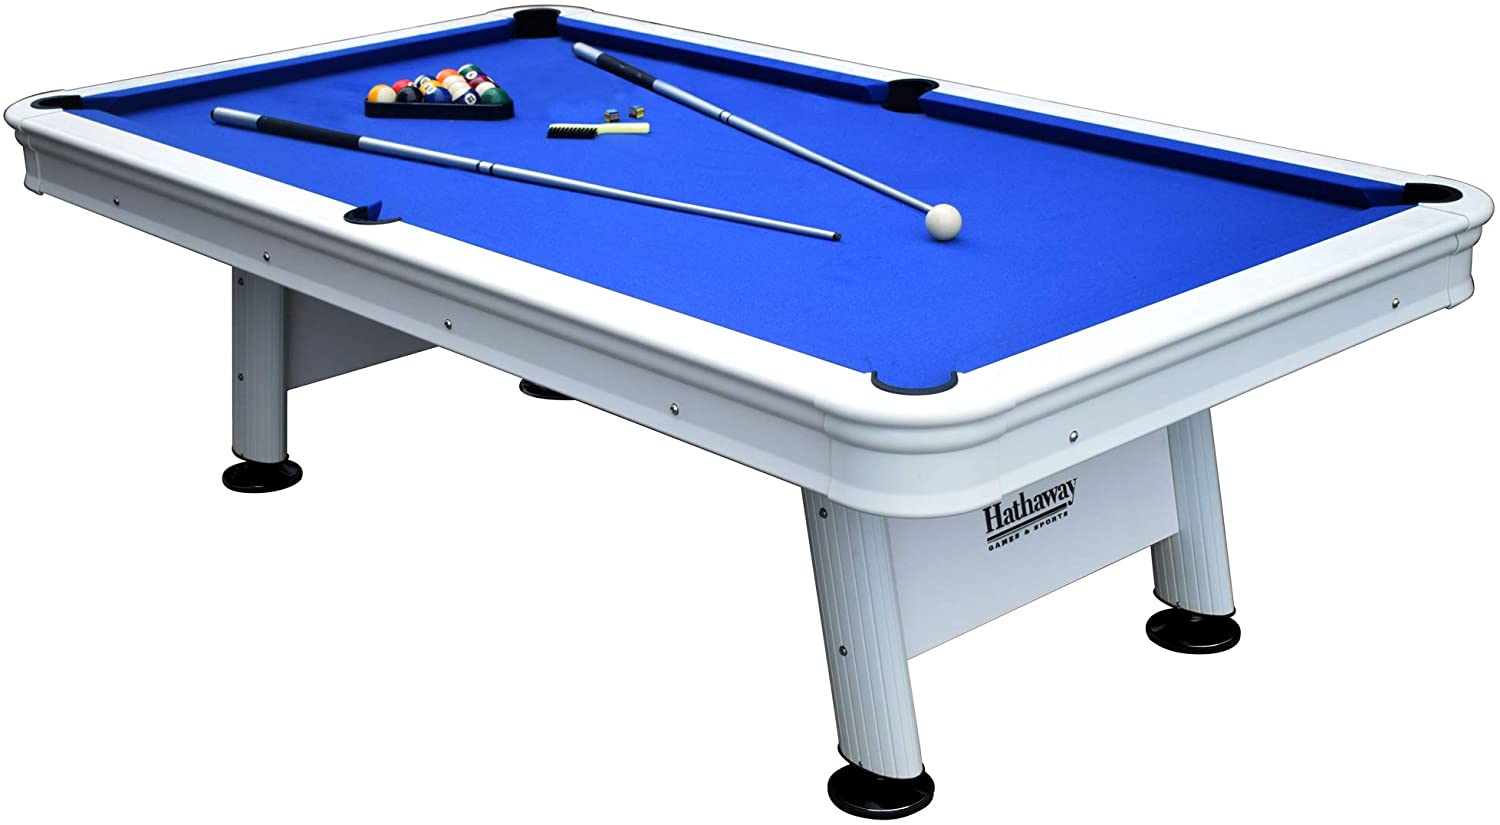 Hathaway Alpine 8-ft Outdoor Pool Table with Aluminum Frame and Waterproof, UV-Resistant Felt - Includes Accessories, White